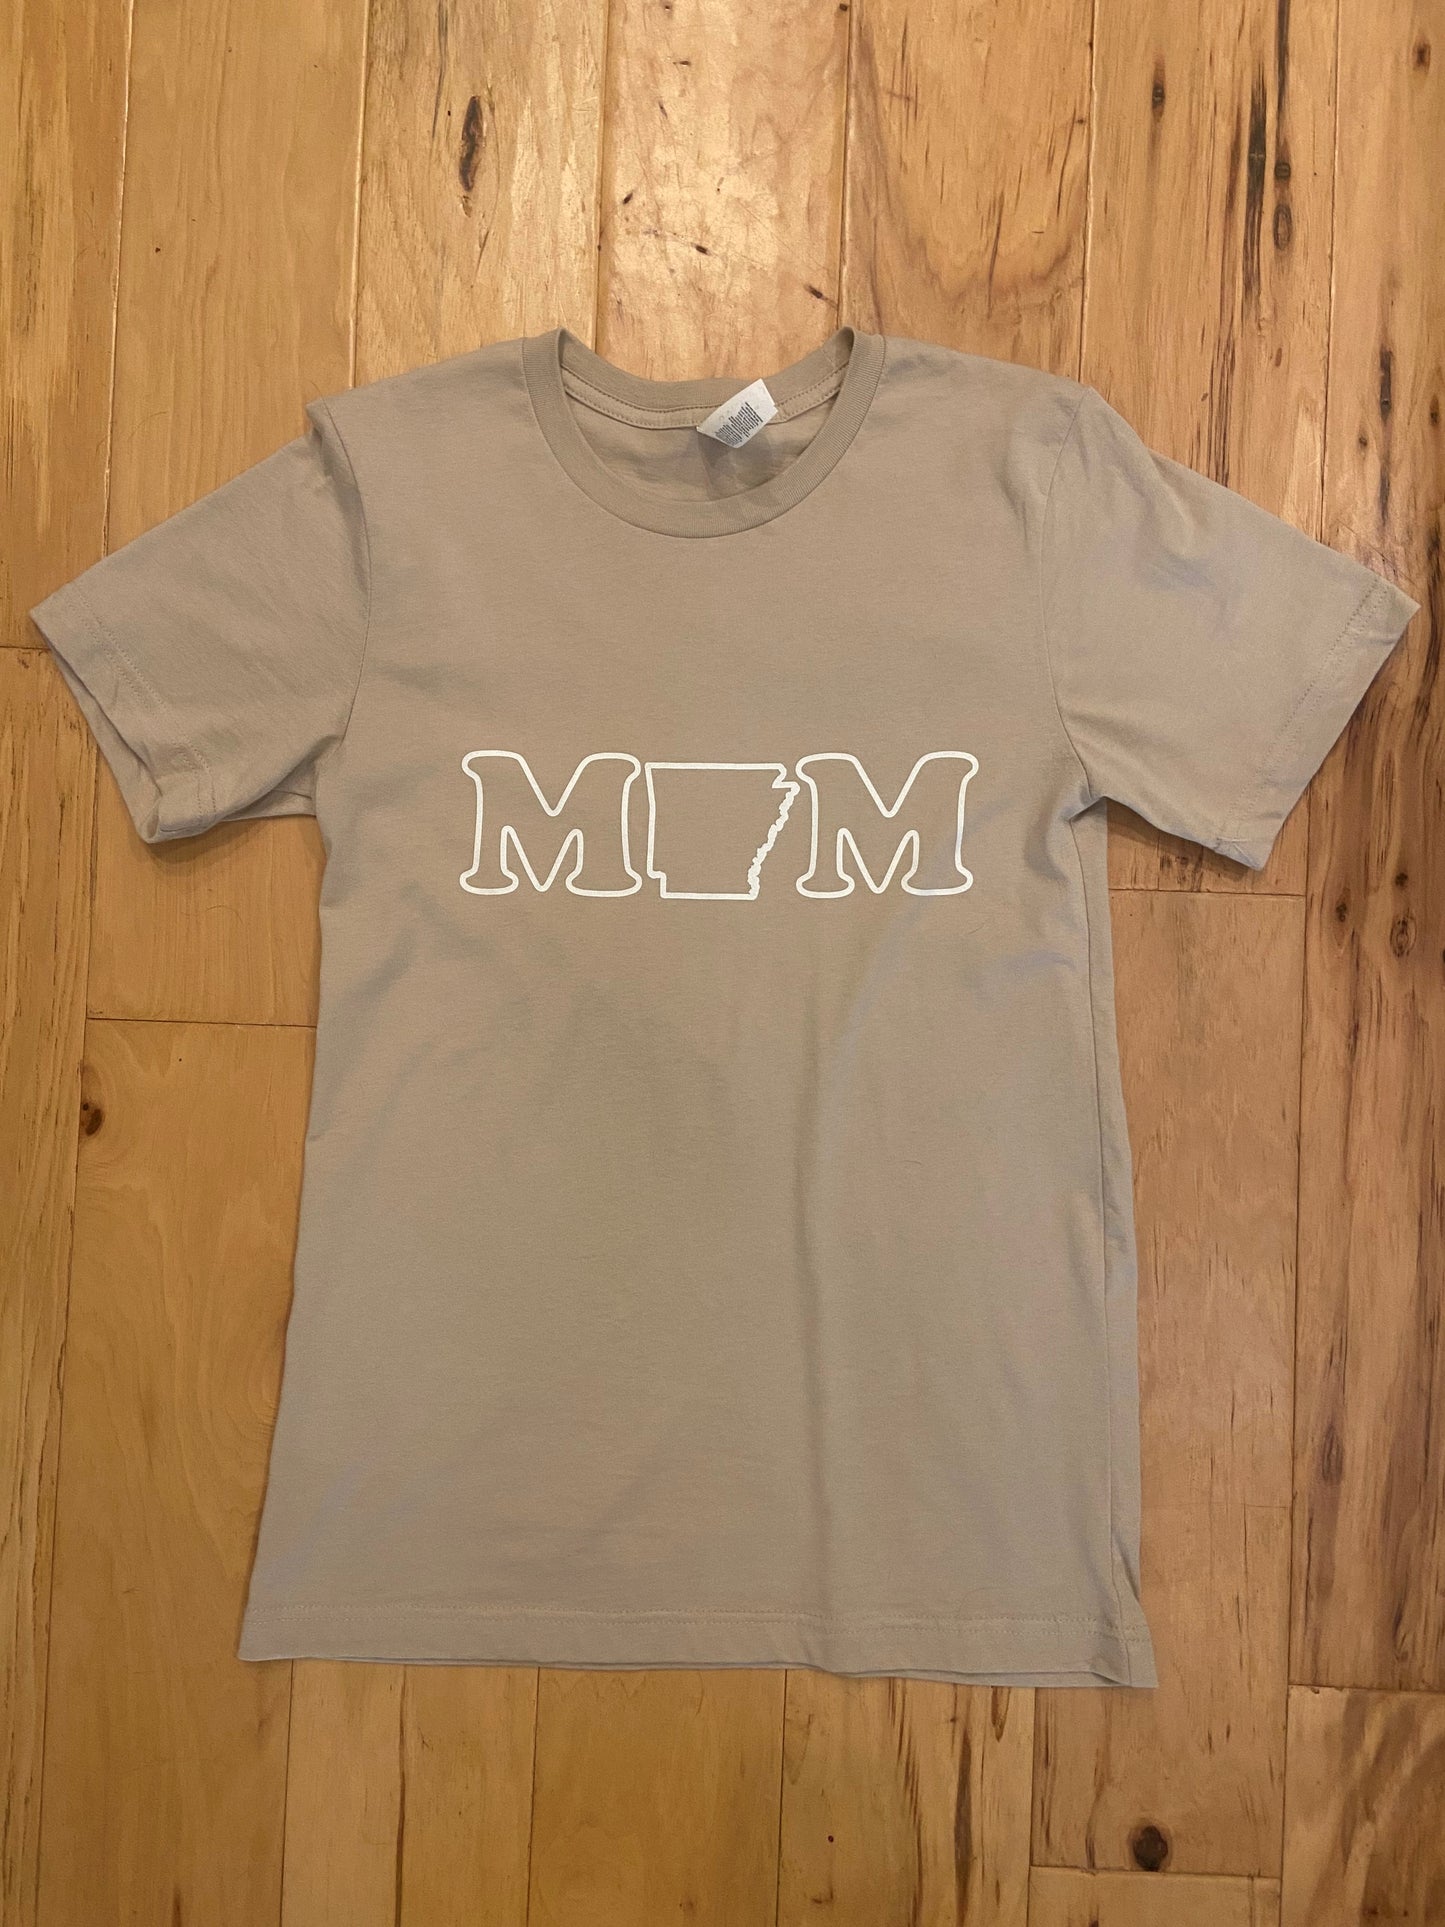 Texas Mom Tee-3 Colors Available